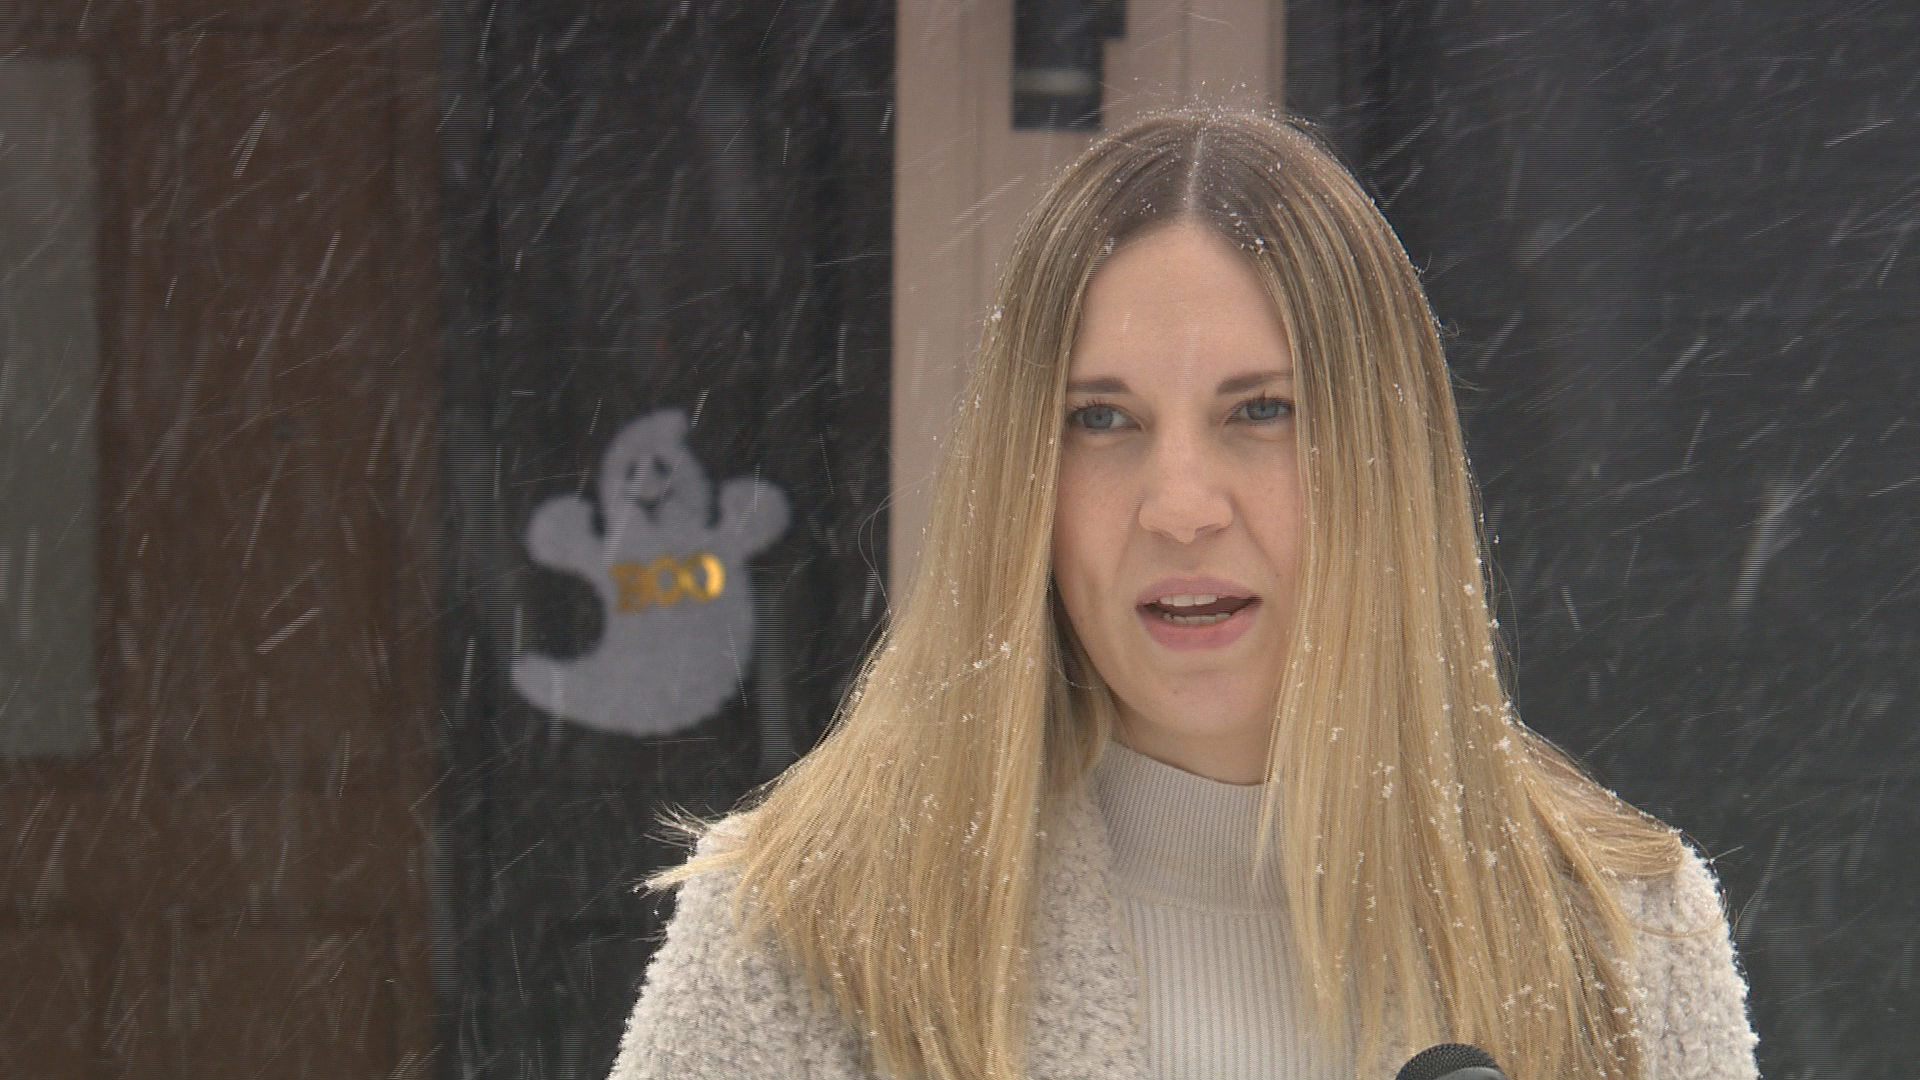 Winnipeg resident Teresa Yehudiaff says that she works to ensure that her three-year-old toddler doesn’t accidentally consume candy that can trigger his anaphylactic allergy.